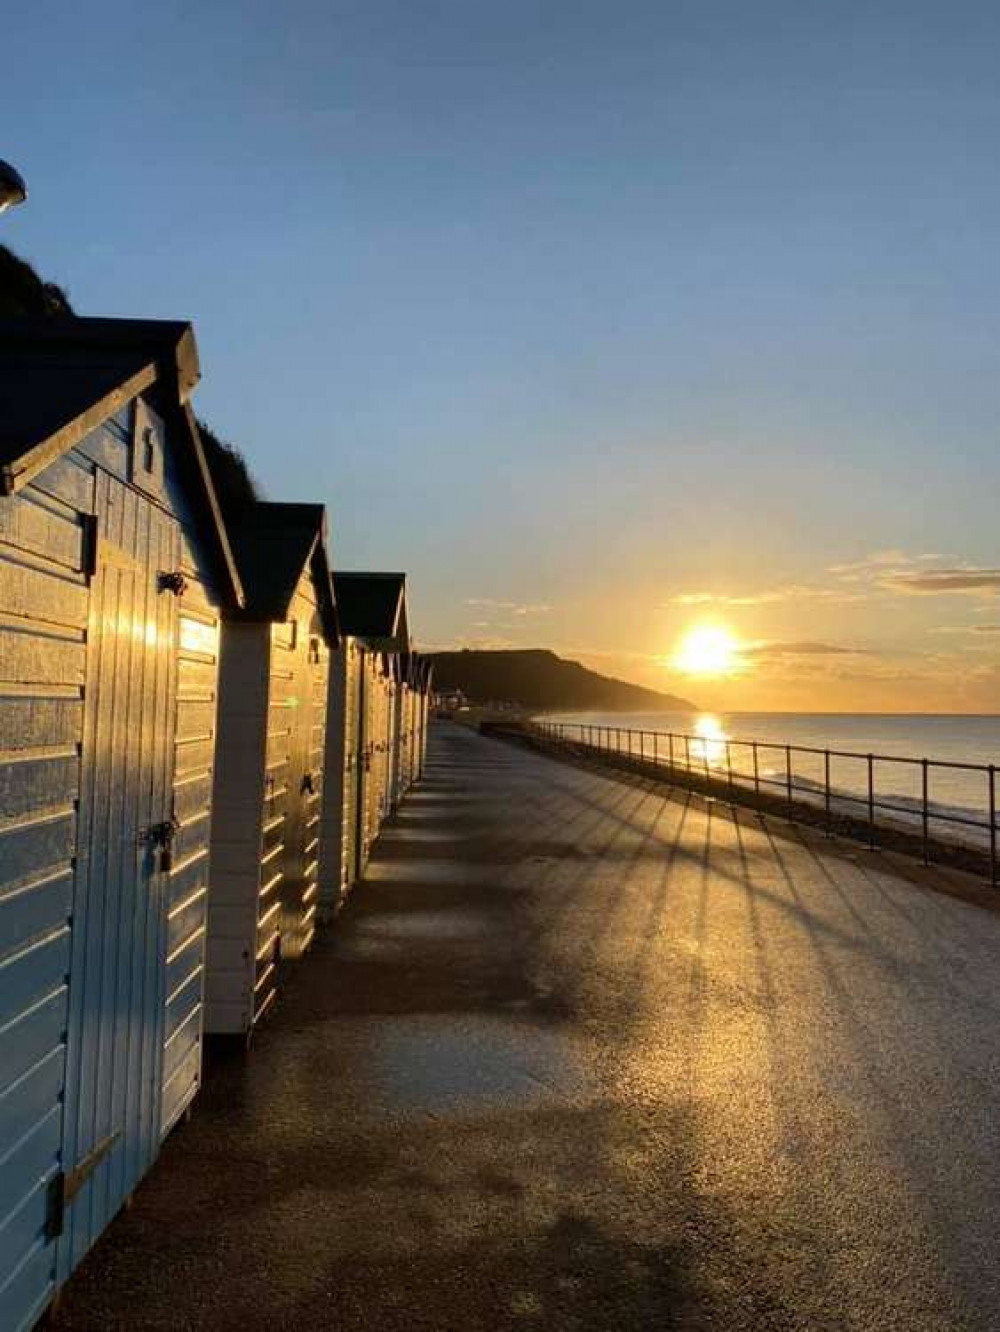 Sunrise on Seaton seafront, taken by Gill Melly